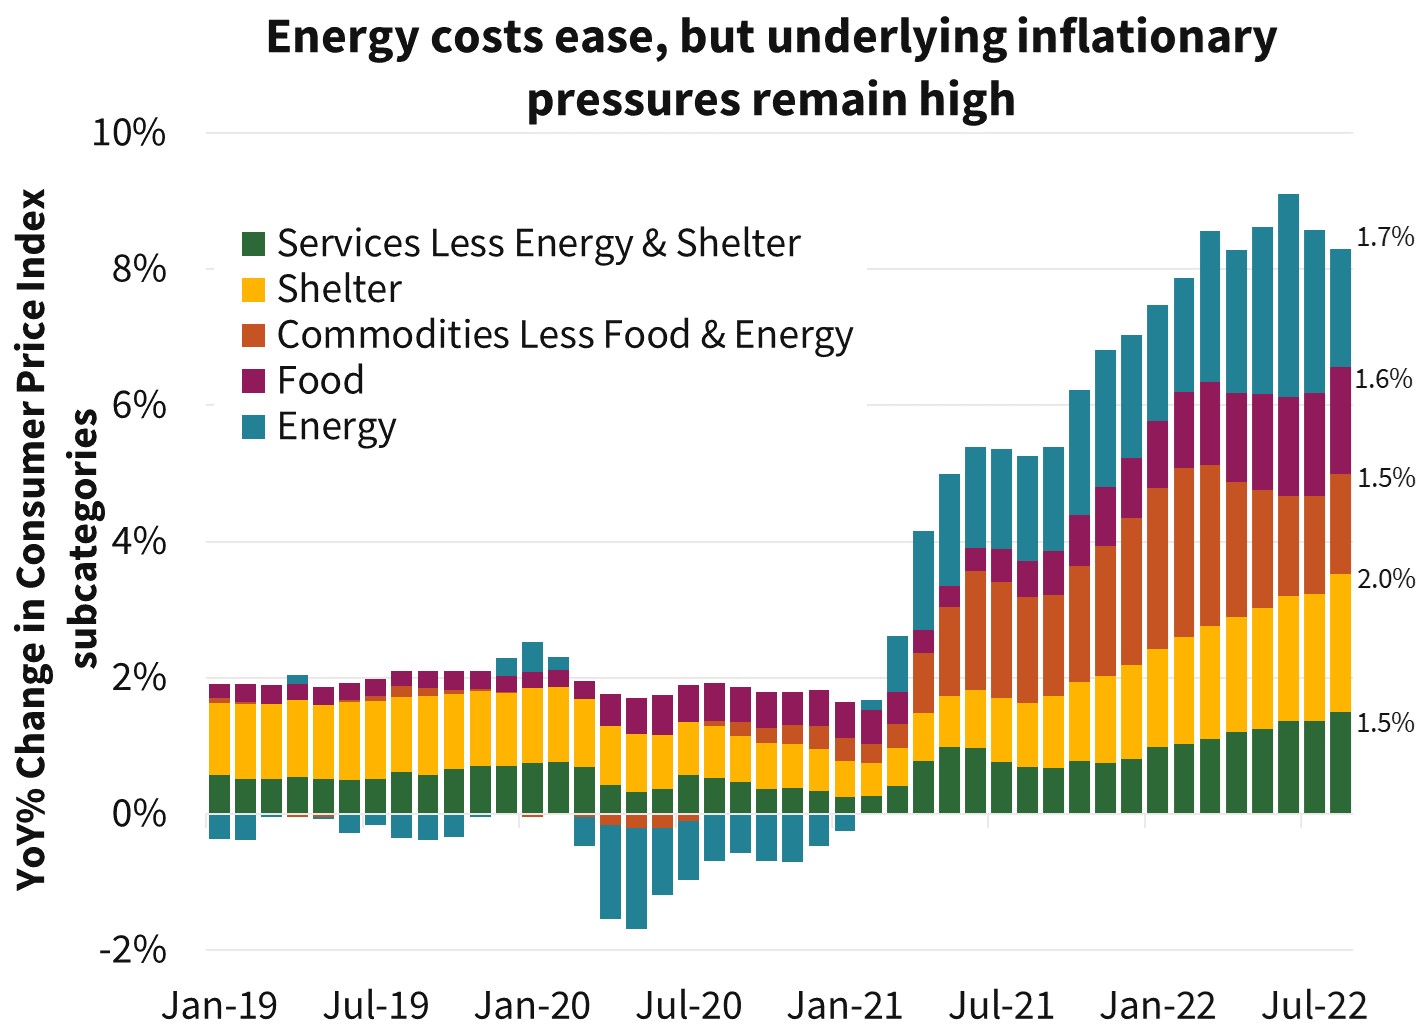  Energy costs ease, but underlying inflationary pressures remain high 